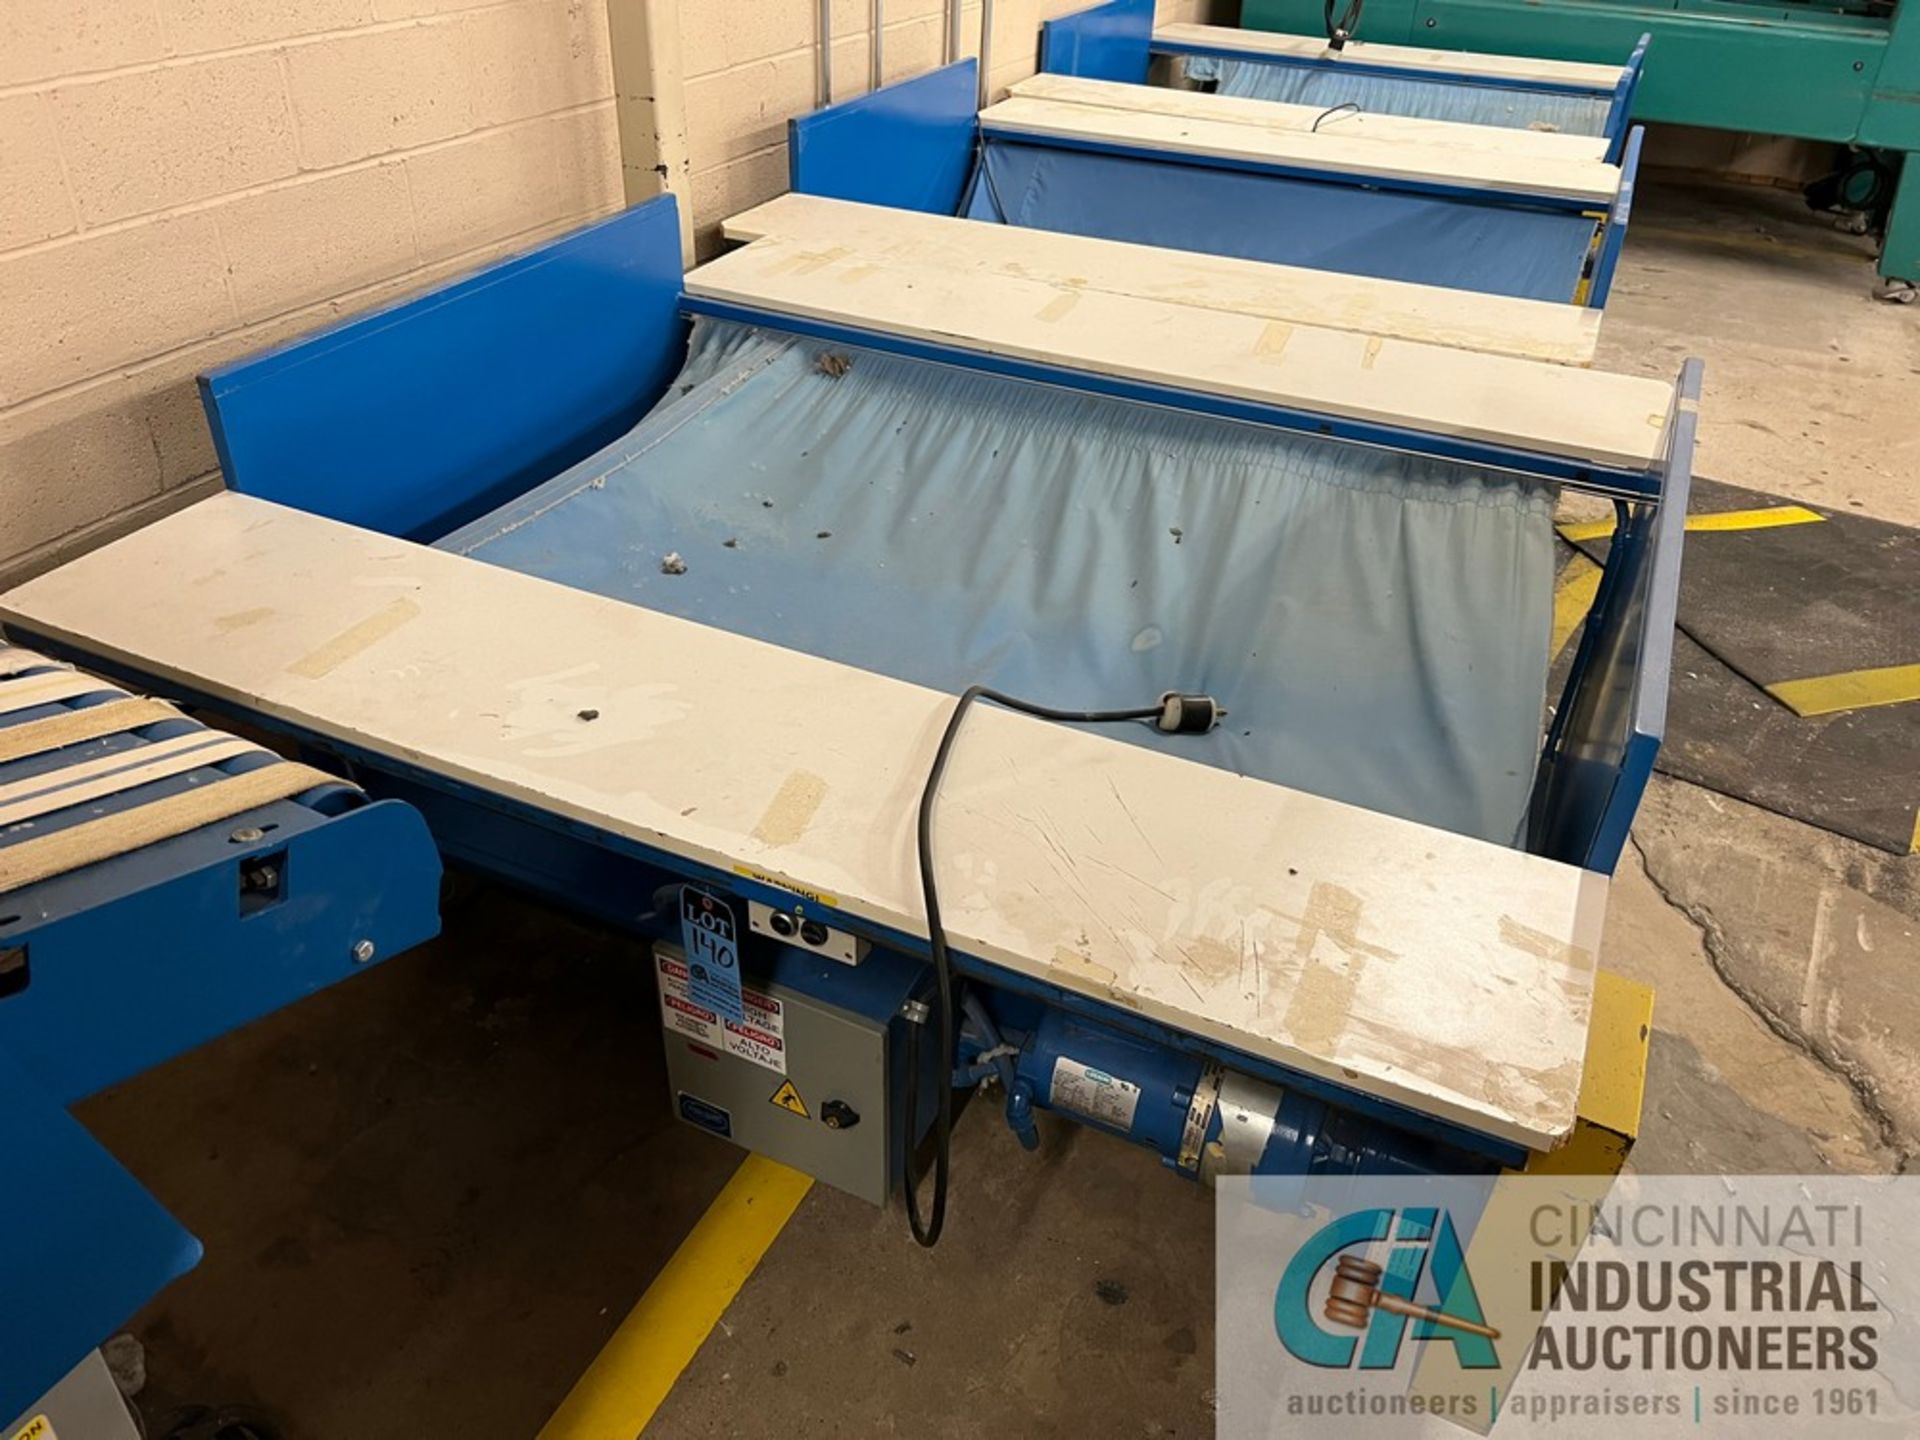 SPEED CHECK CONVEYOR MODEL 10-1-057 ROLL SORTING TABLE WITH PUSH BUTTON CONTROLS **For